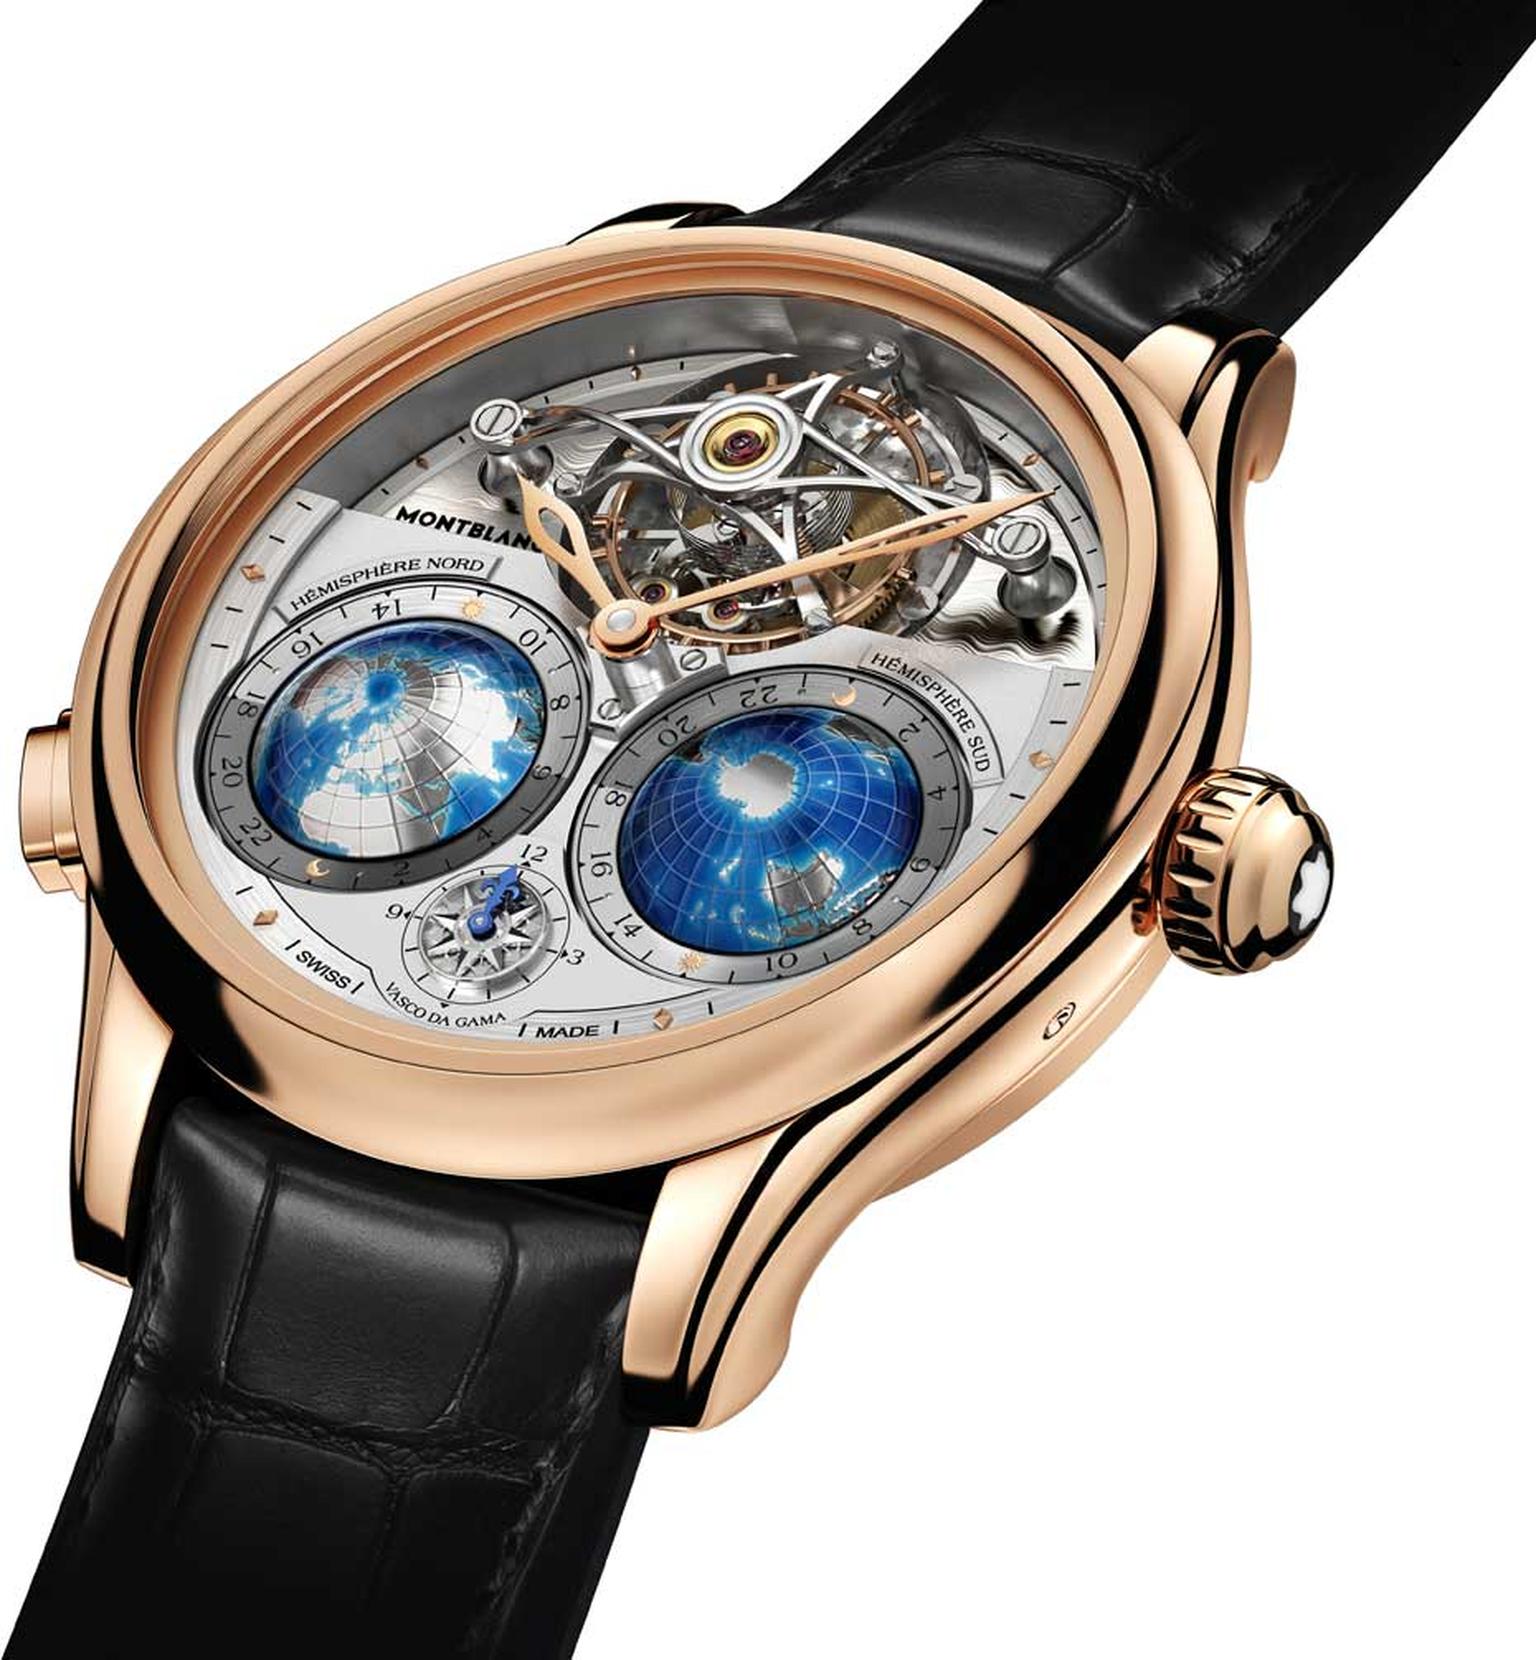 Montblanc Tourbillon Cylindrique Geosphères Vasco da Gama combines a tourbillon with a triple time zone indicator. The global world-time indication is graphically represented by the two blue globes on the dial.